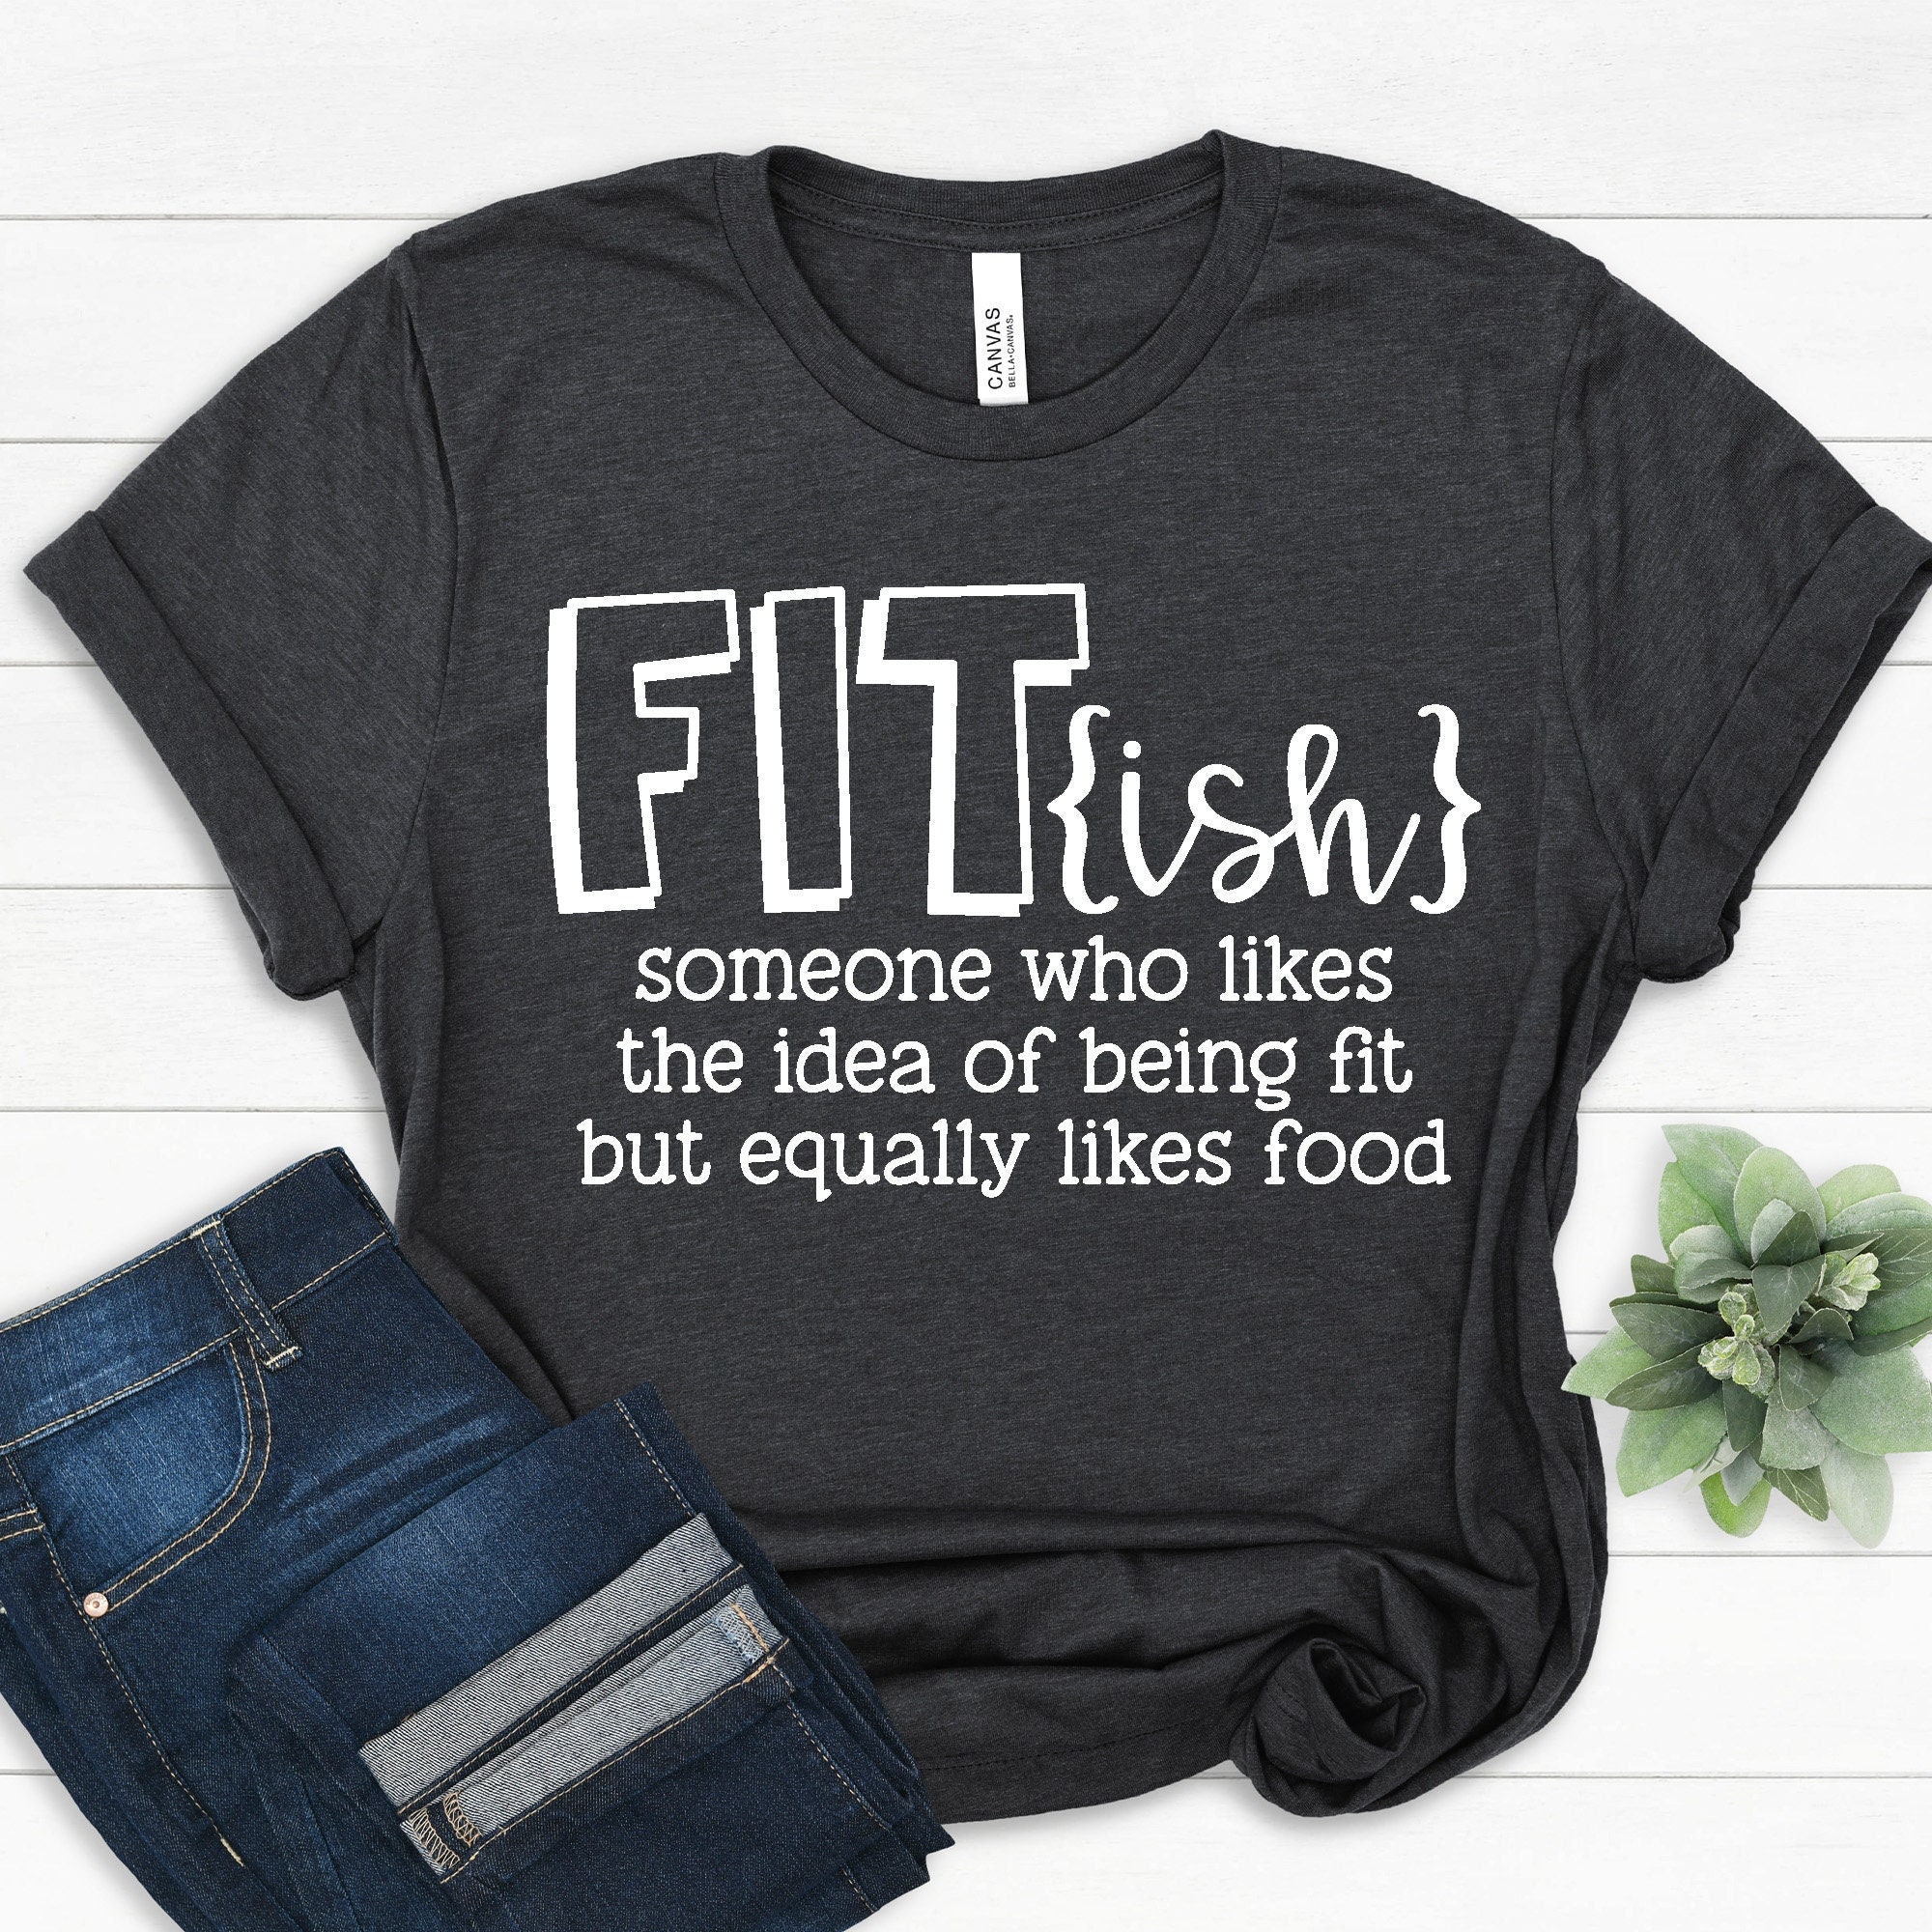 Funny Gym Shirt, Fit-ish Definition Shirt, Fitness T Shirt, Fit-ish Shirt, Workout  Shirt, Gym Graphic Tee, Essential T-Shirt for Sale by lastearth